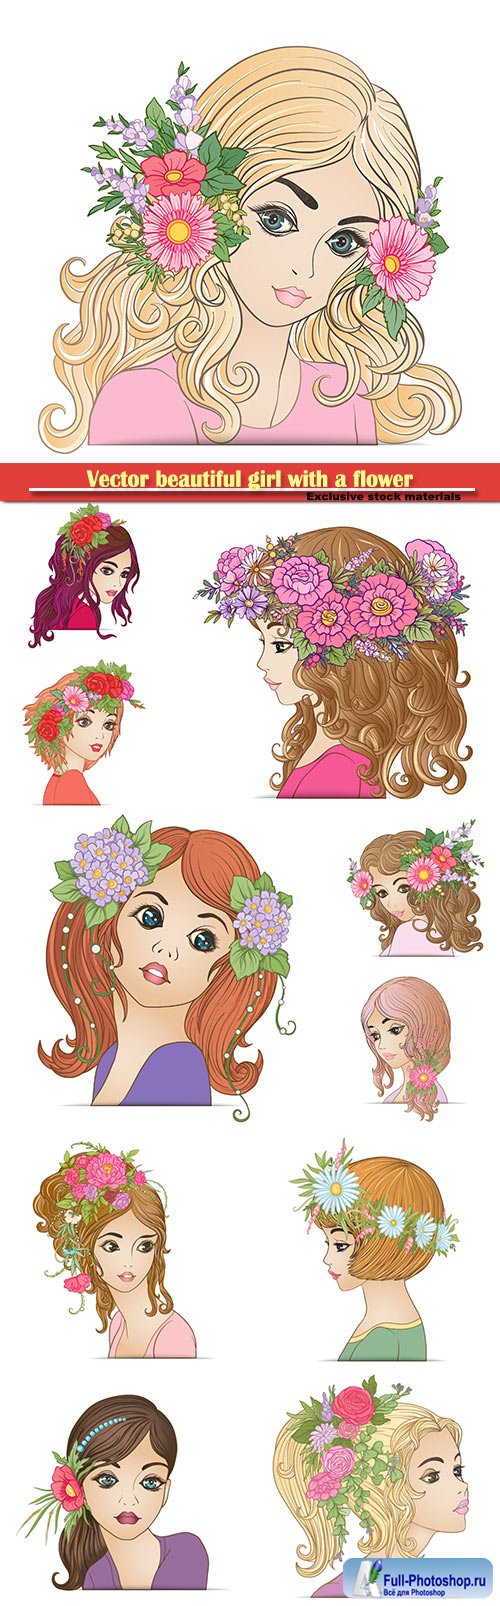 Vector beautiful girl with a flower wreath on his head